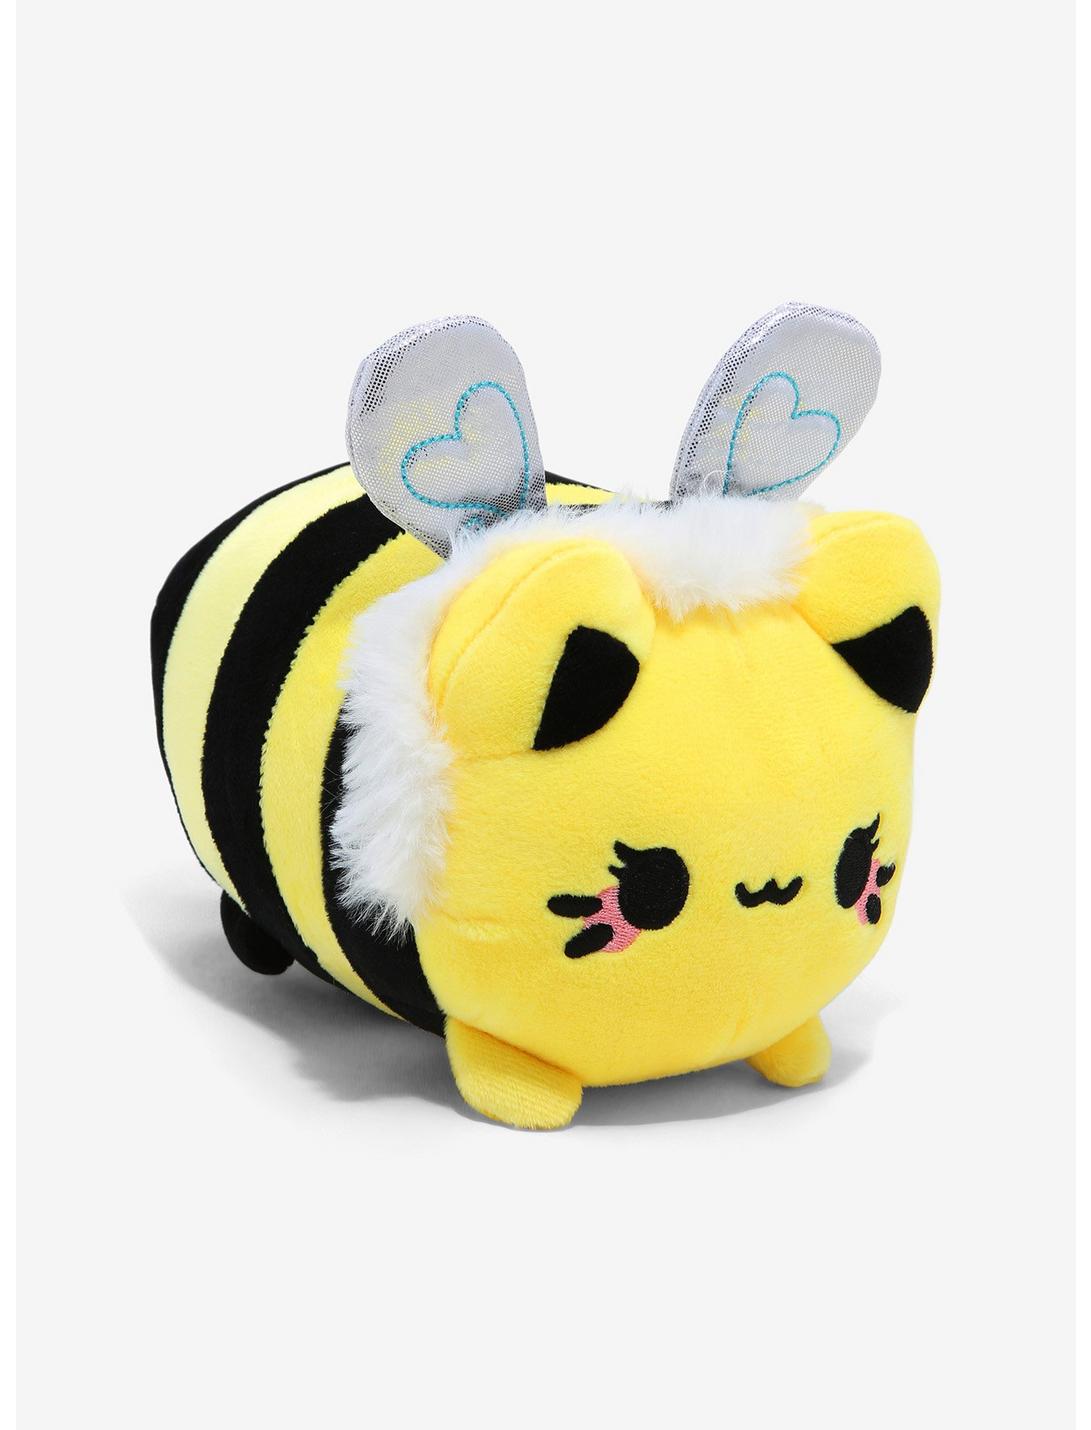 Tasty Peach Queen Bee Meowchi Plush Hot Topic Exclusive, , hi-res